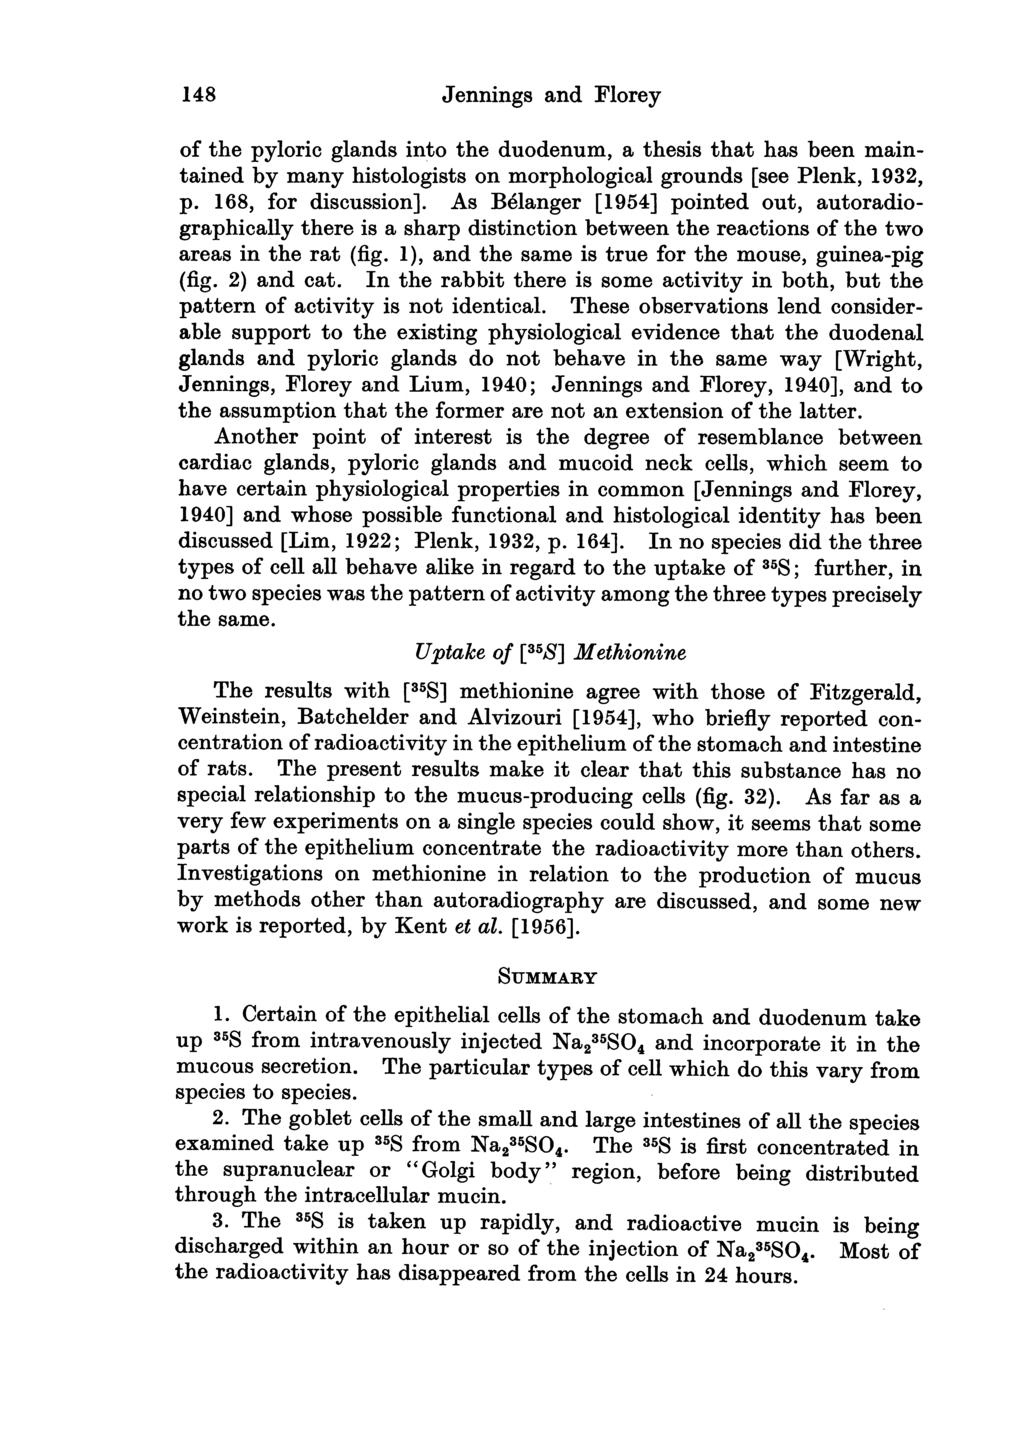 148 Jennings and Florey of the pyloric glands into the duodenum, a thesis that has been maintained by many histologists on morphological grounds [see Plenk, 1932, p. 168, for discussion].